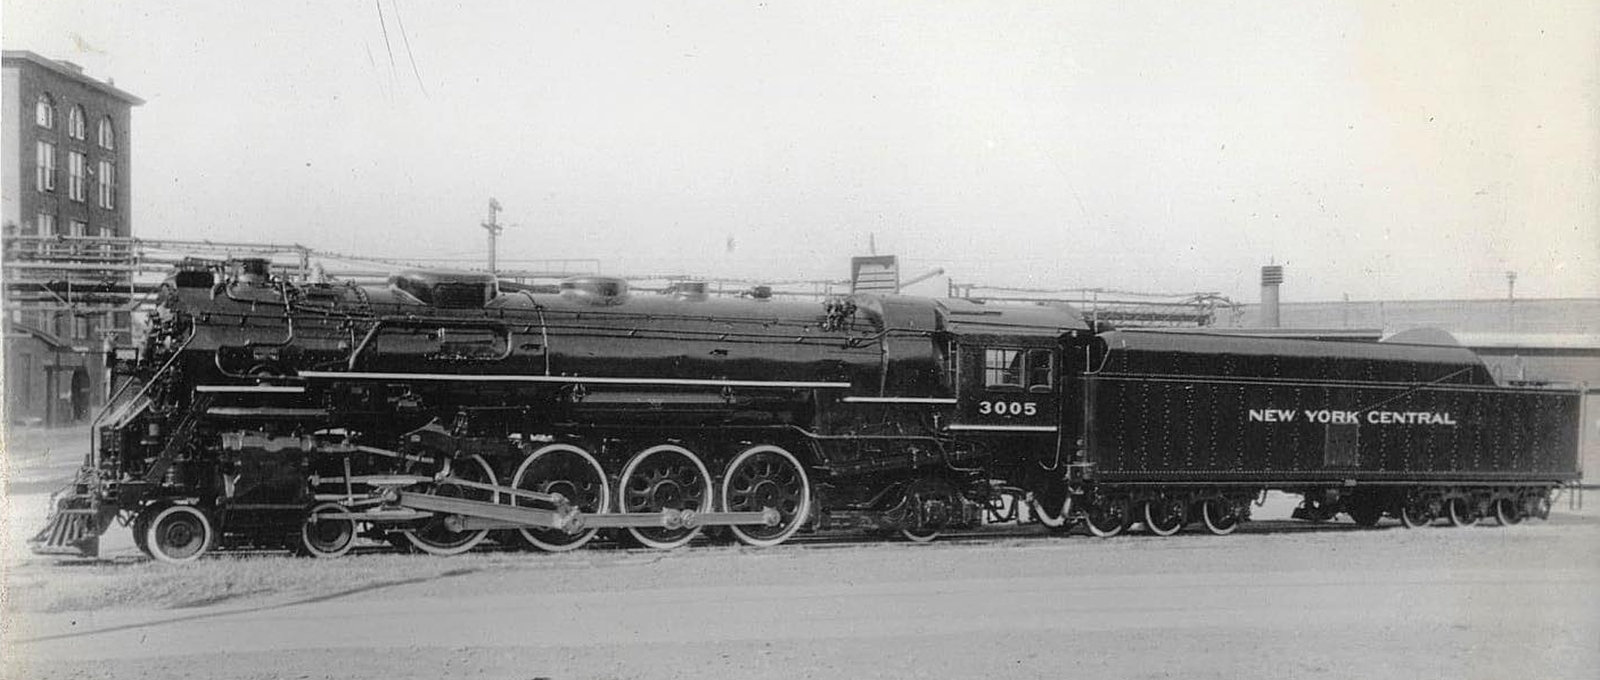 No. 3005 on a works photo